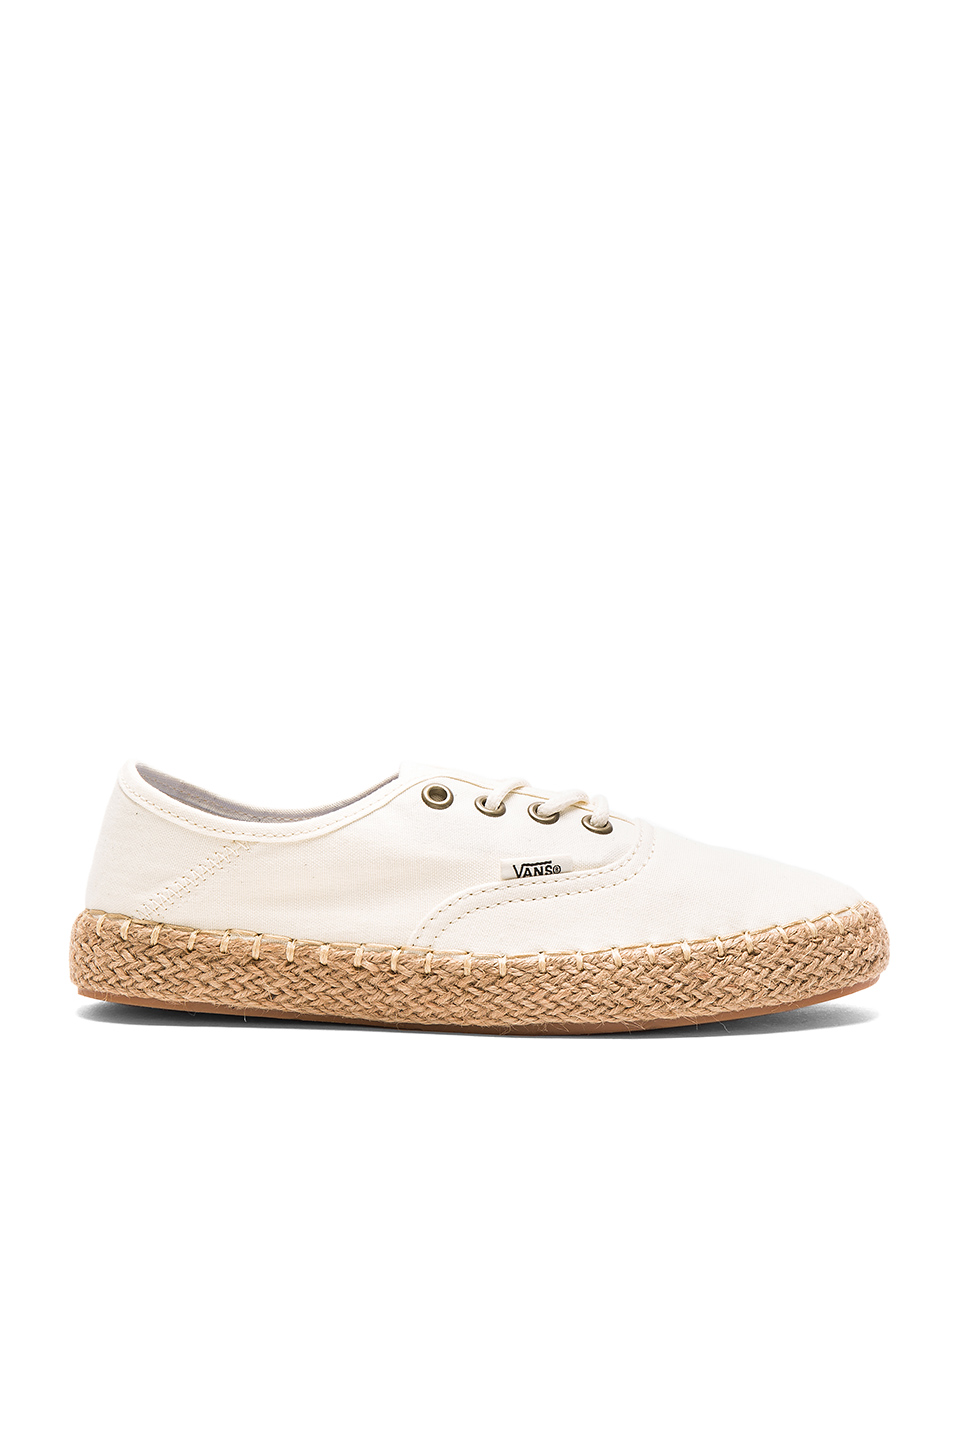 Vans 'leather Authentic Espadrille' Sneakers In Classic White | ModeSens